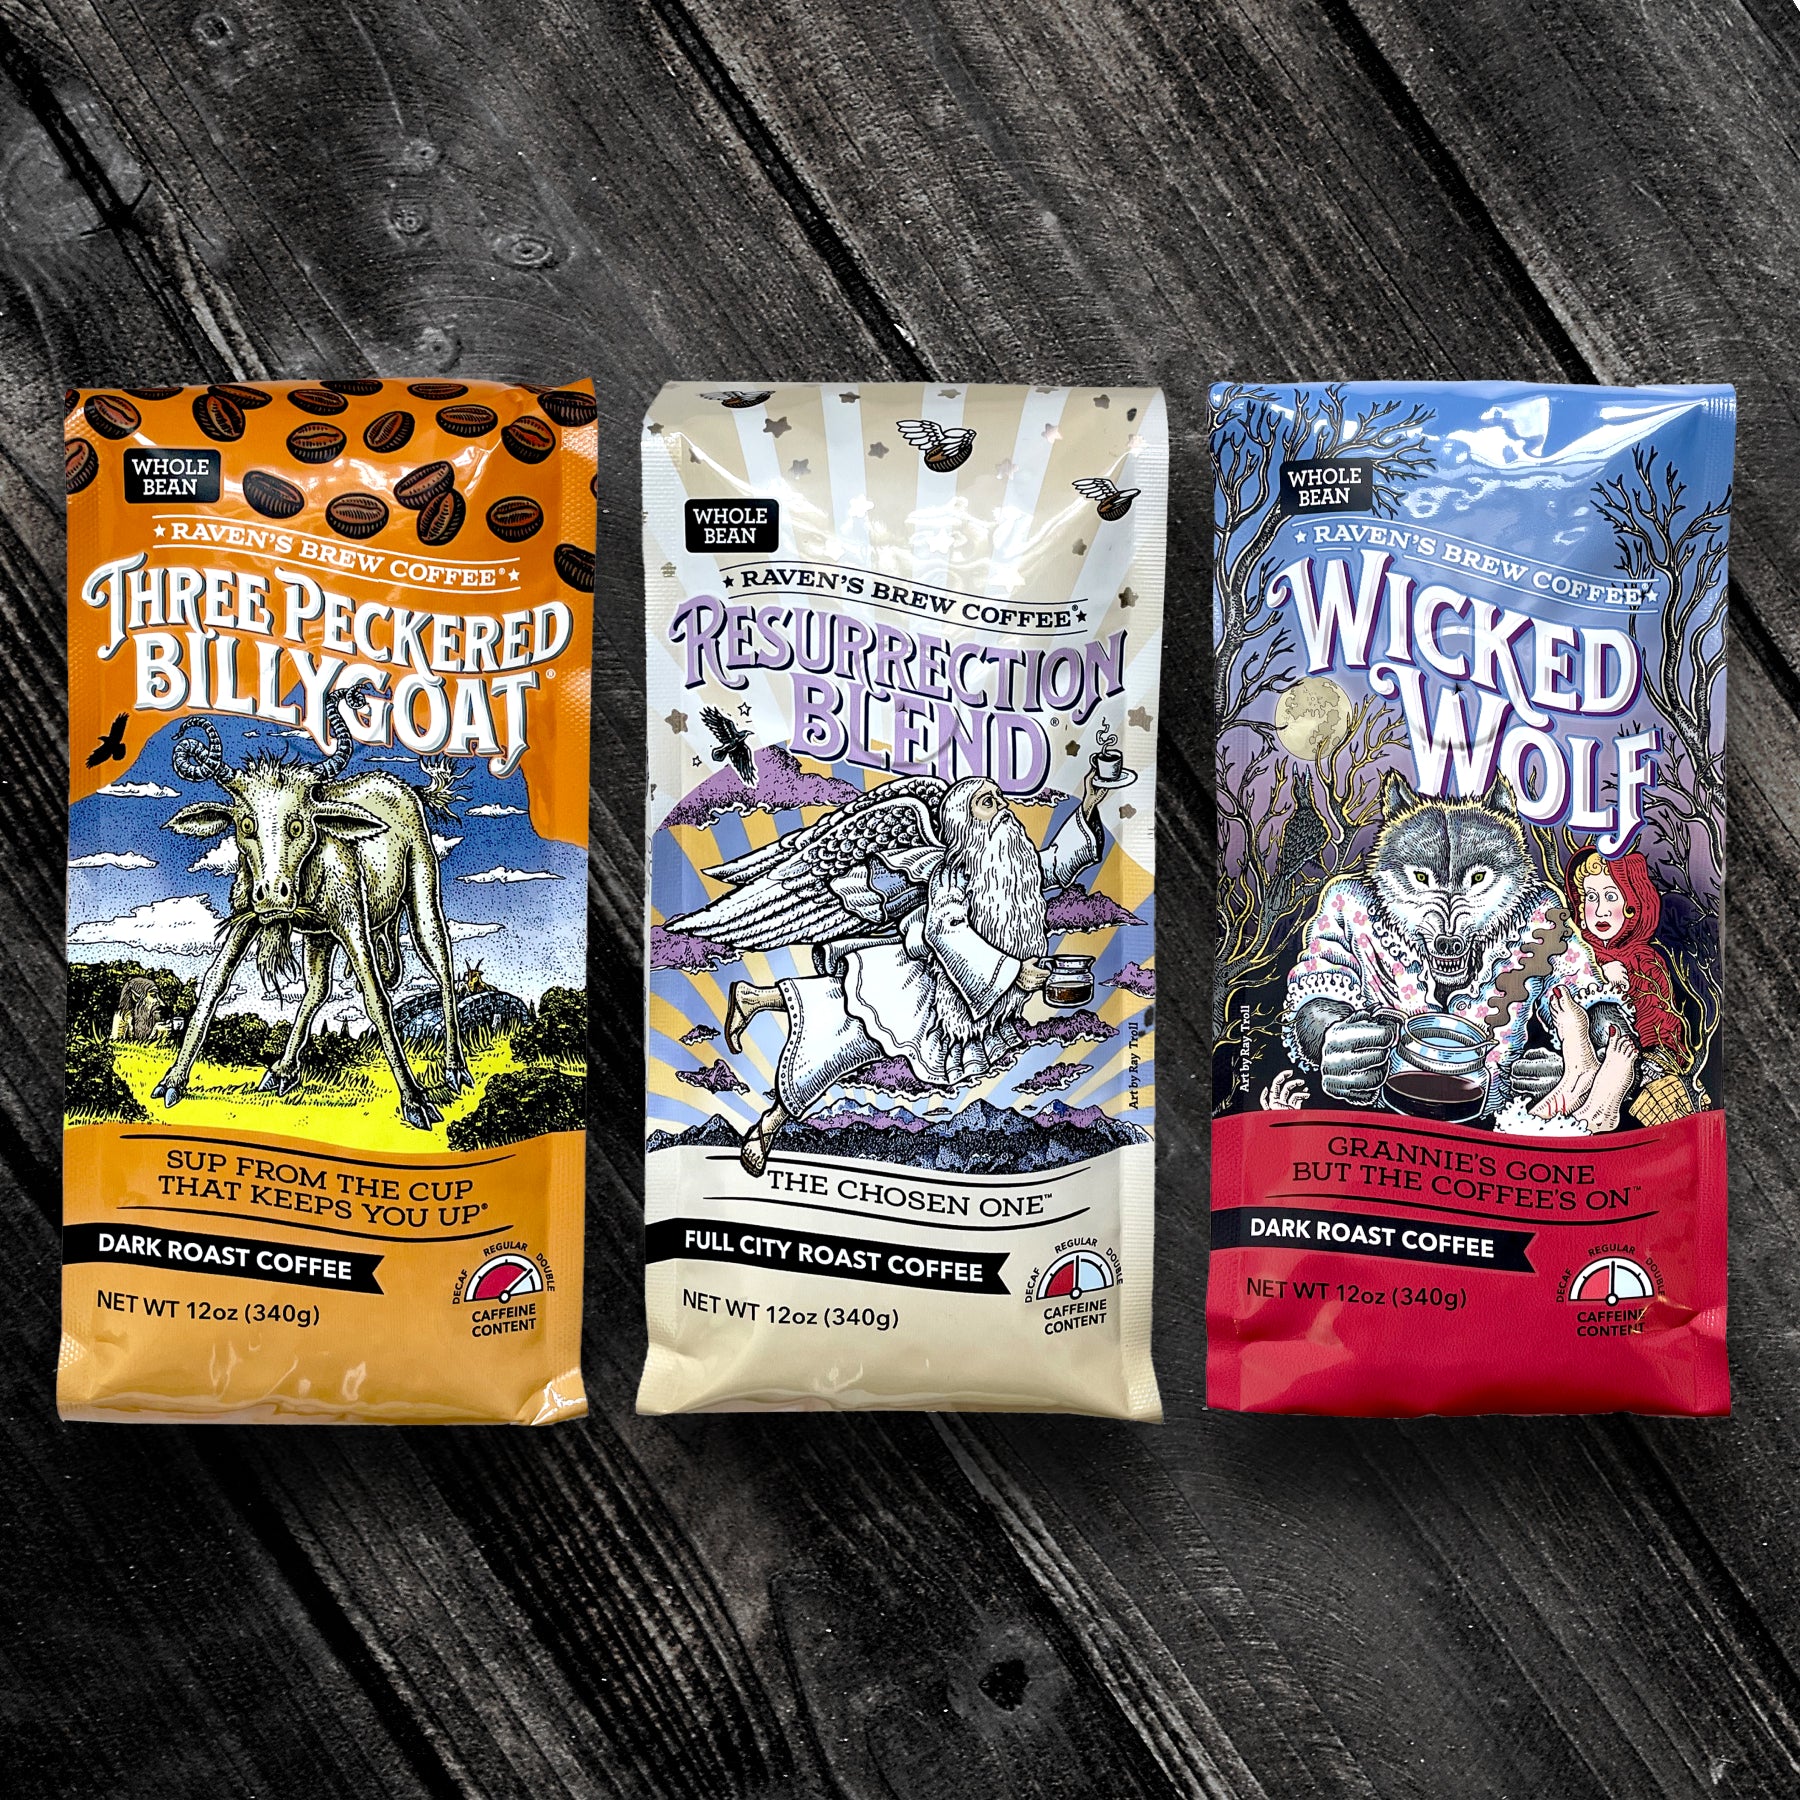 Three Peckered Billy Goat® Coffee, Resurrection® Blend Coffee and Wicked Wolf® Coffee Whole Bean Cold Brew Pack